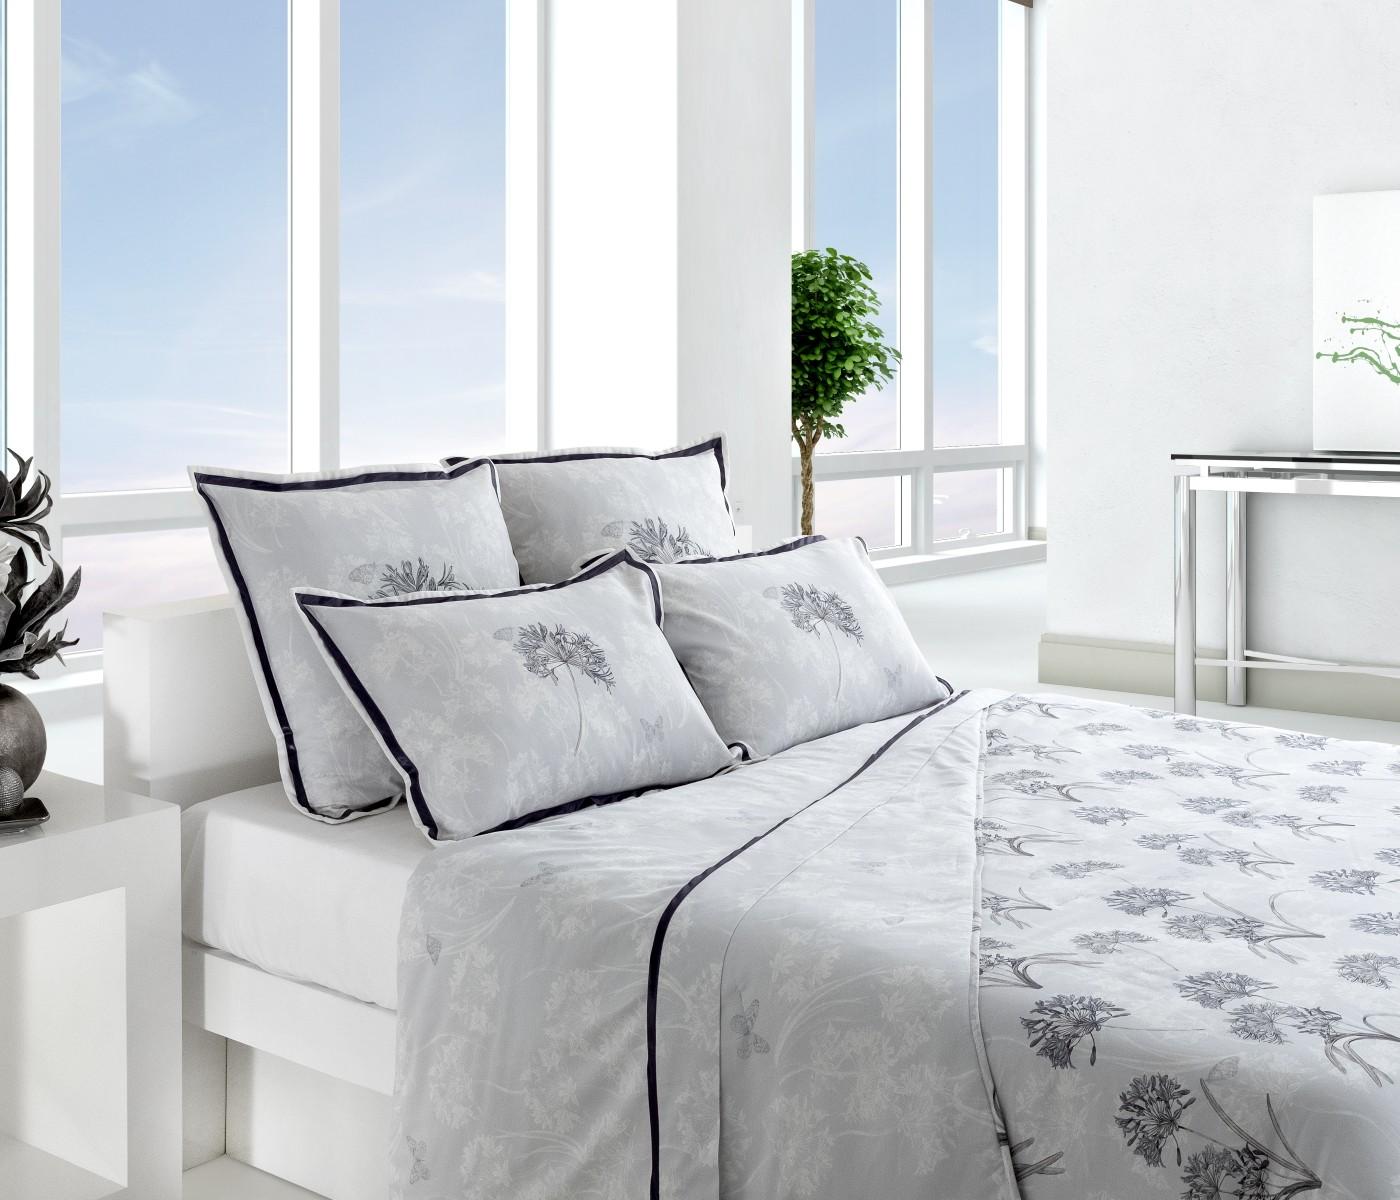 More than just giving you a pleasant feeling of comfort, this delicate set duvet cover creates a sophisticated ambience in the entire decor of your bedroom.

From the fineness of a mate white, to the refinement of the dark-blue, the Kyoto model is